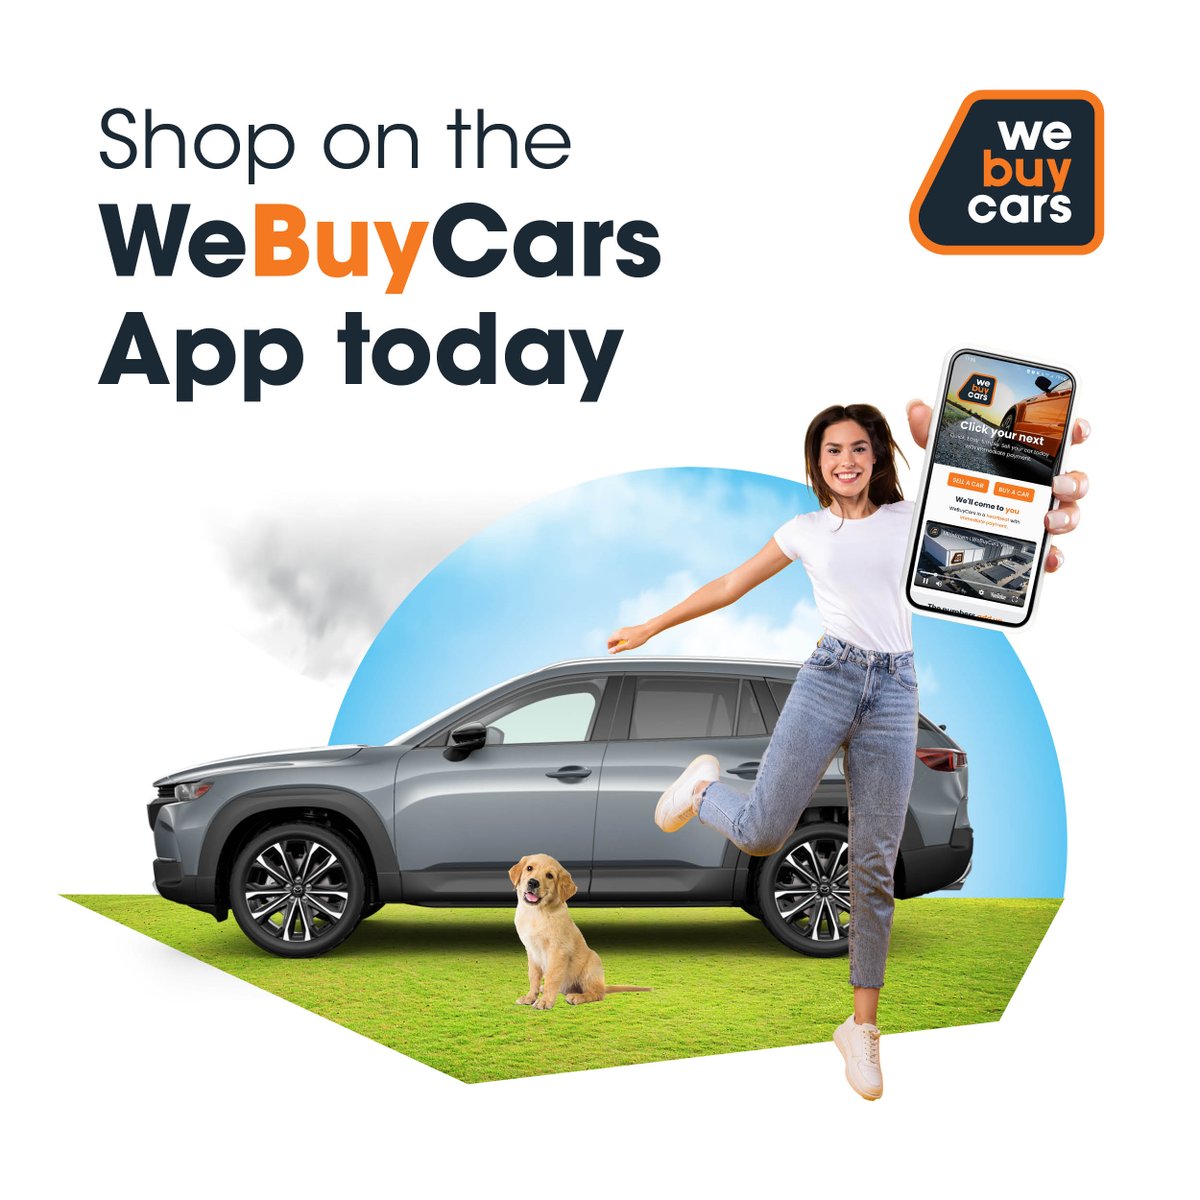 Don't delay! Download and start shopping on the #WeBuyCars App today! 📱